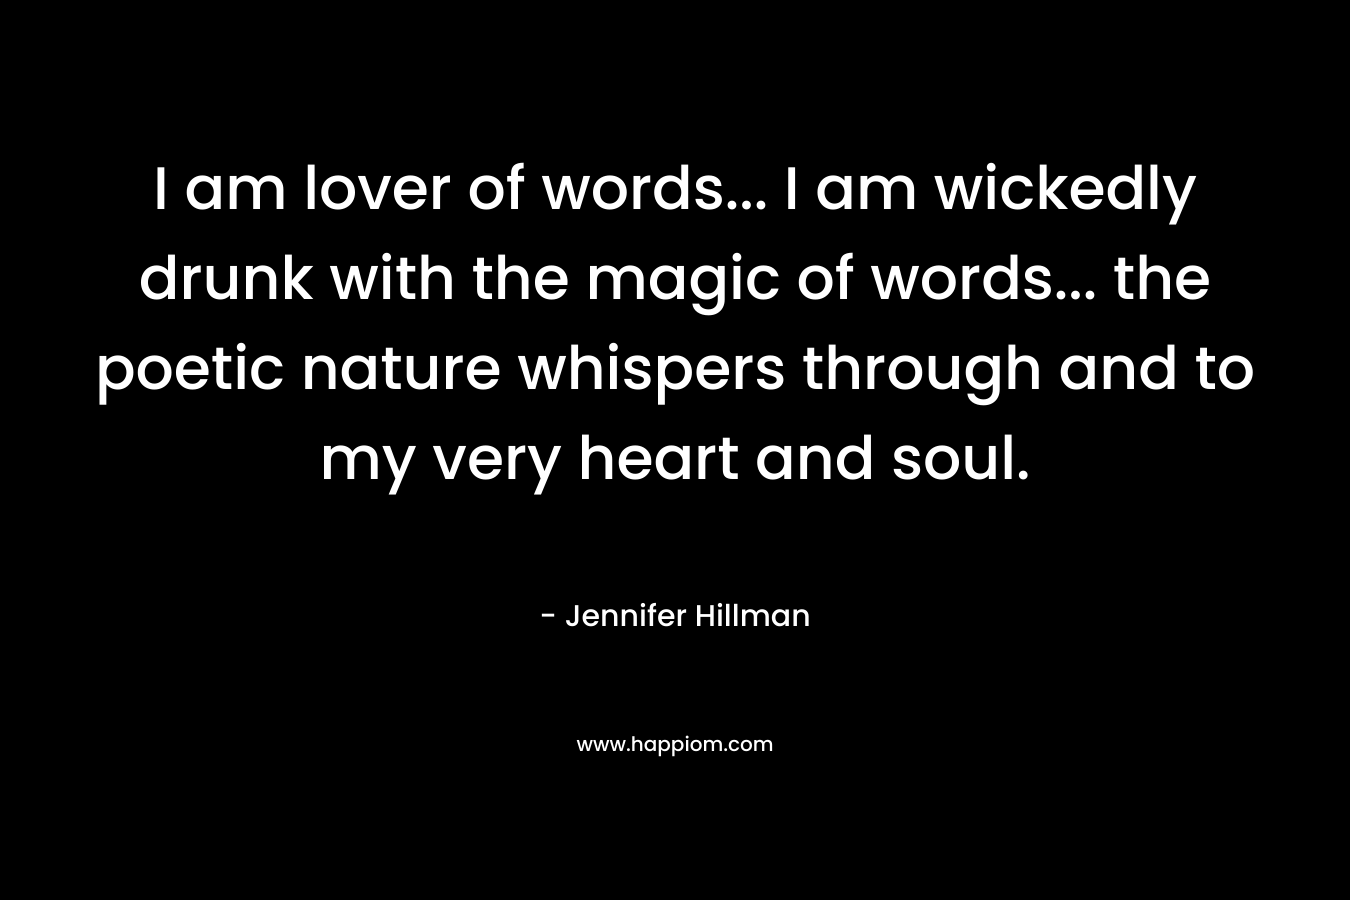 I am lover of words... I am wickedly drunk with the magic of words... the poetic nature whispers through and to my very heart and soul.